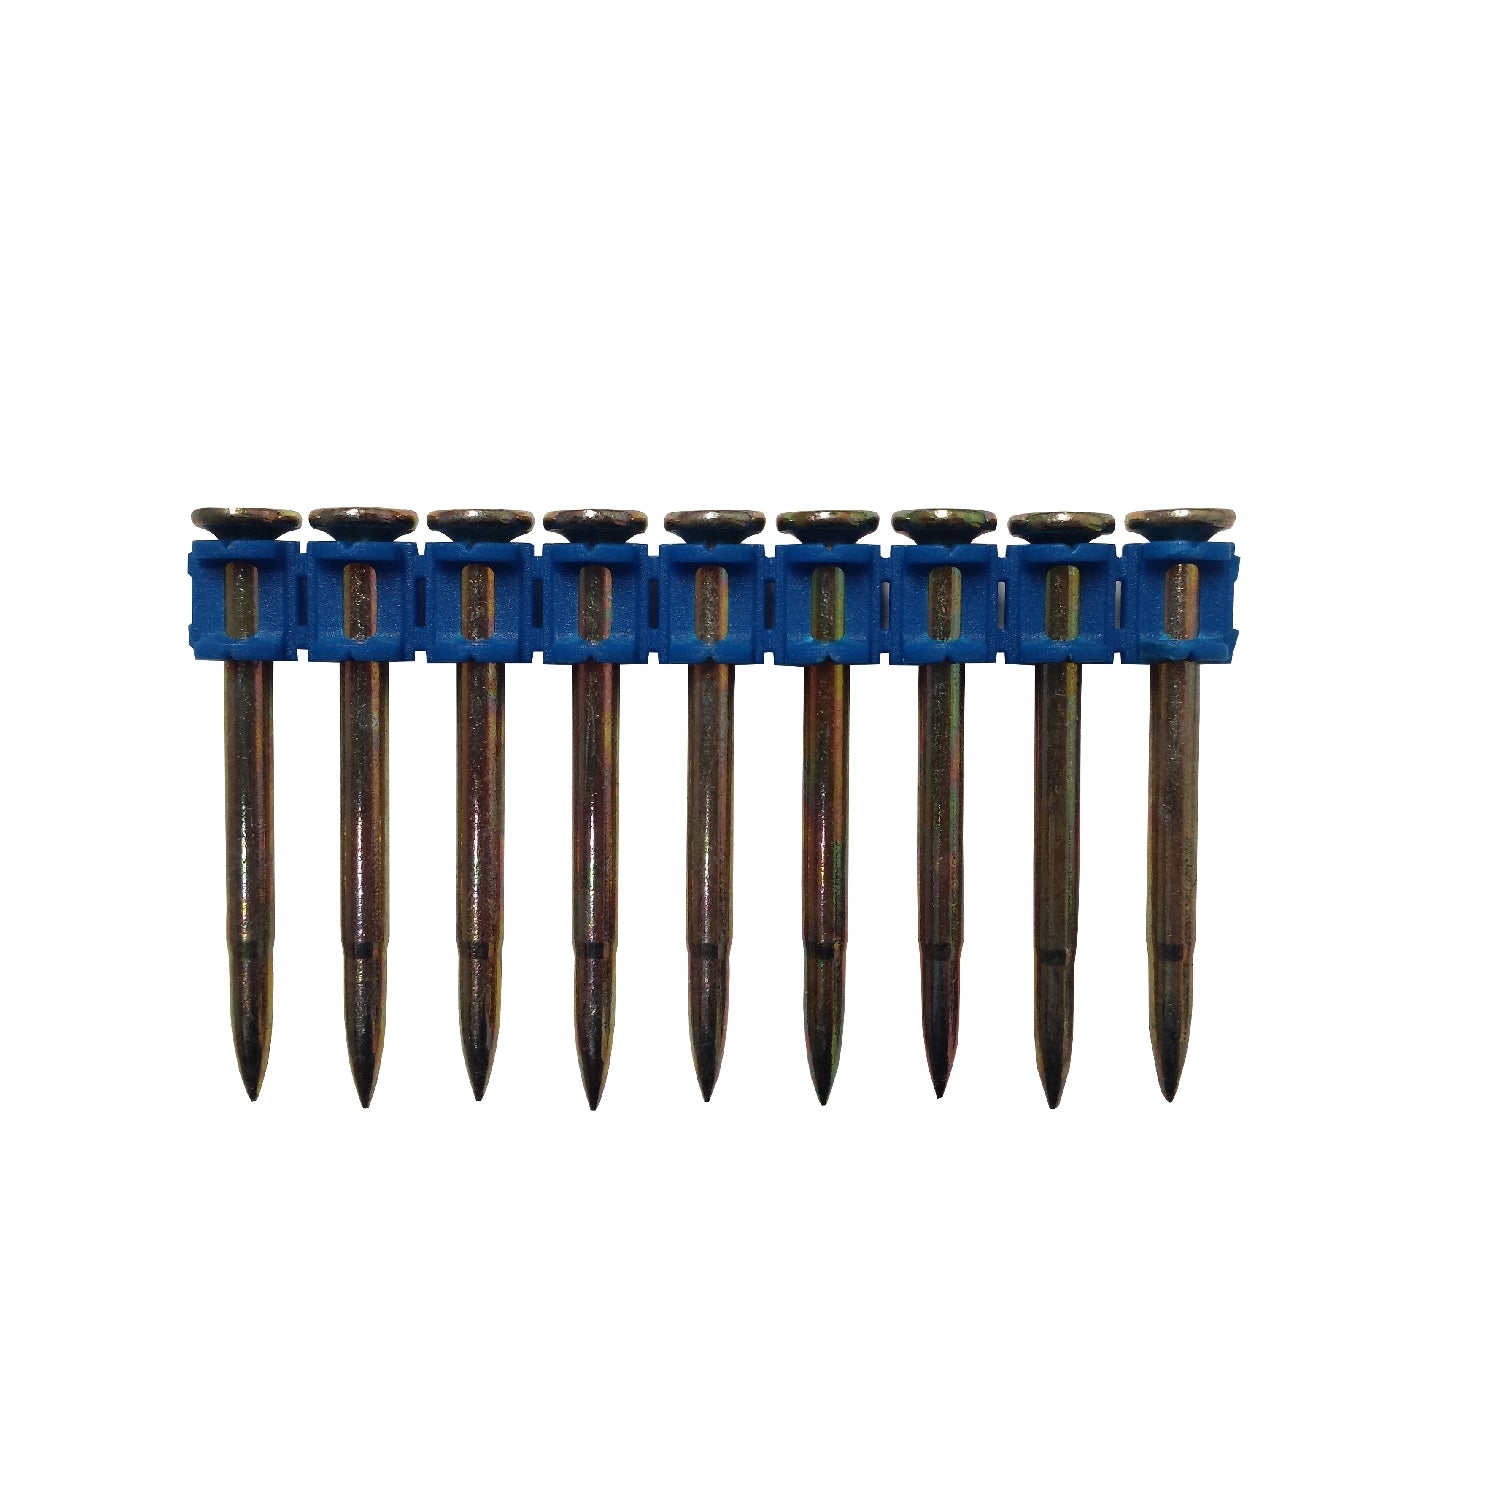 Expandet Collated Low Velocity Drive Pins 15 X 4.0Mm (500 Box)